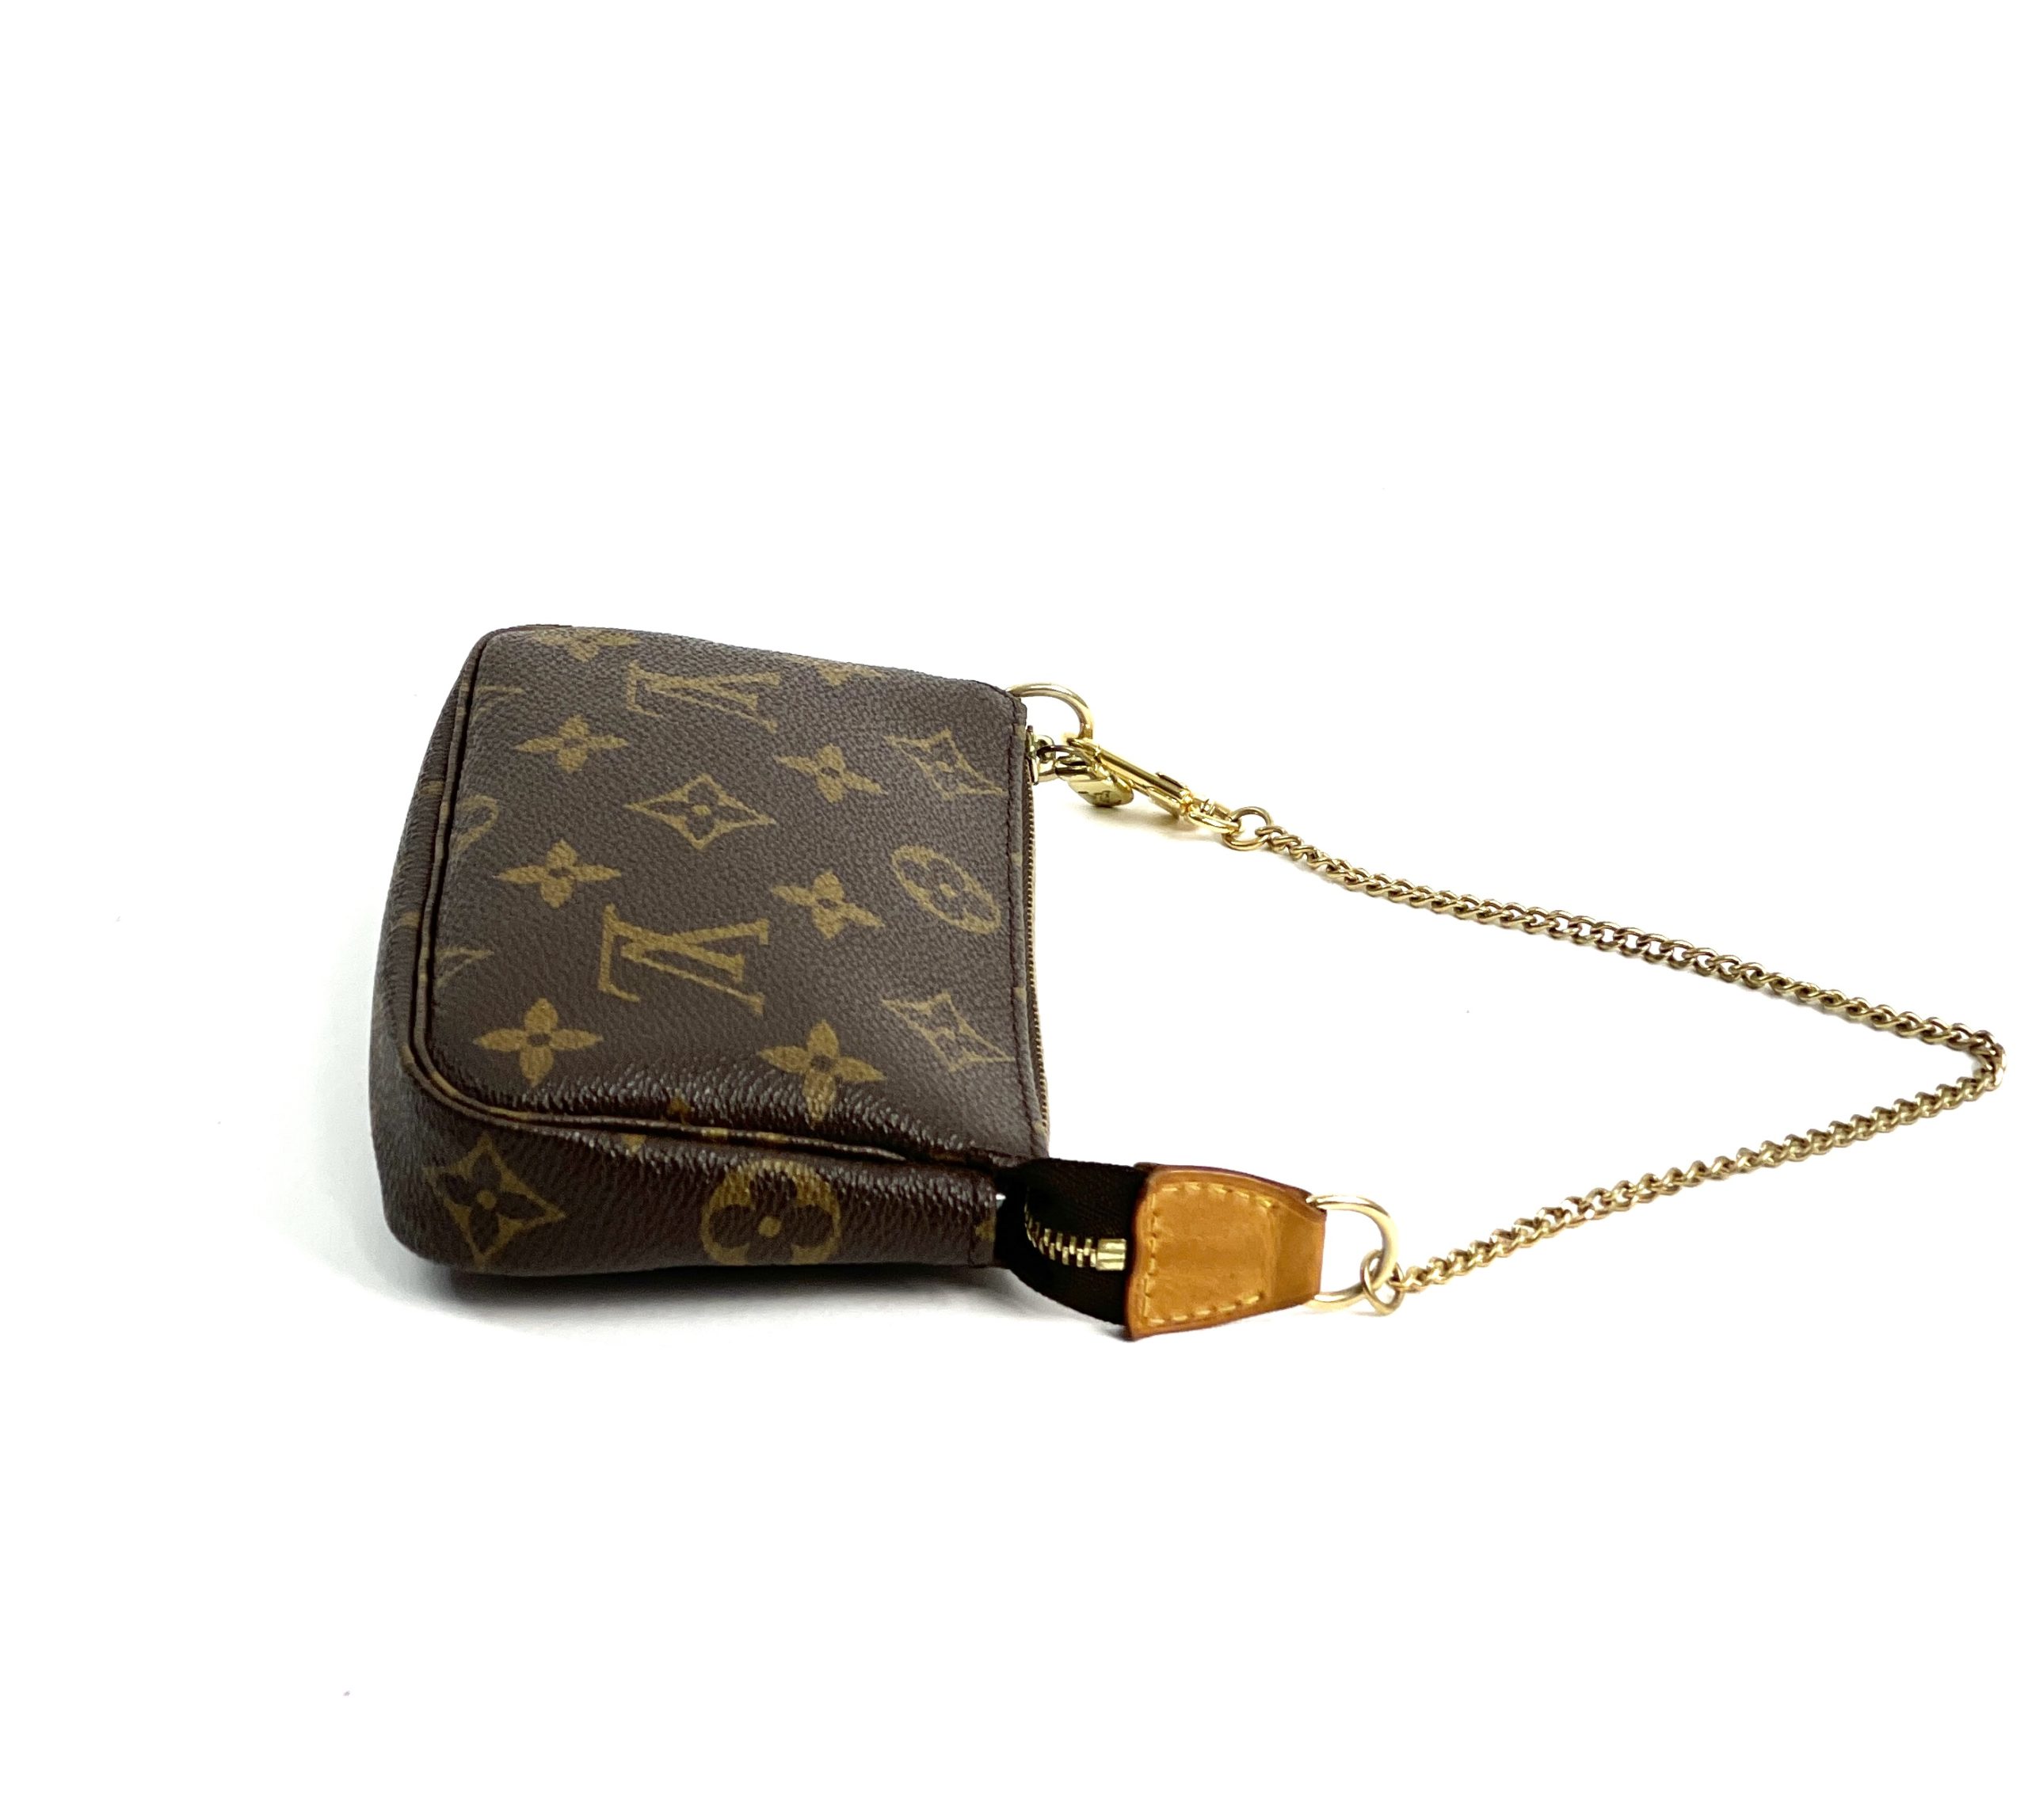 LV Mini Pochette Worth $745❓What I Would Buy Instead! ✓ 